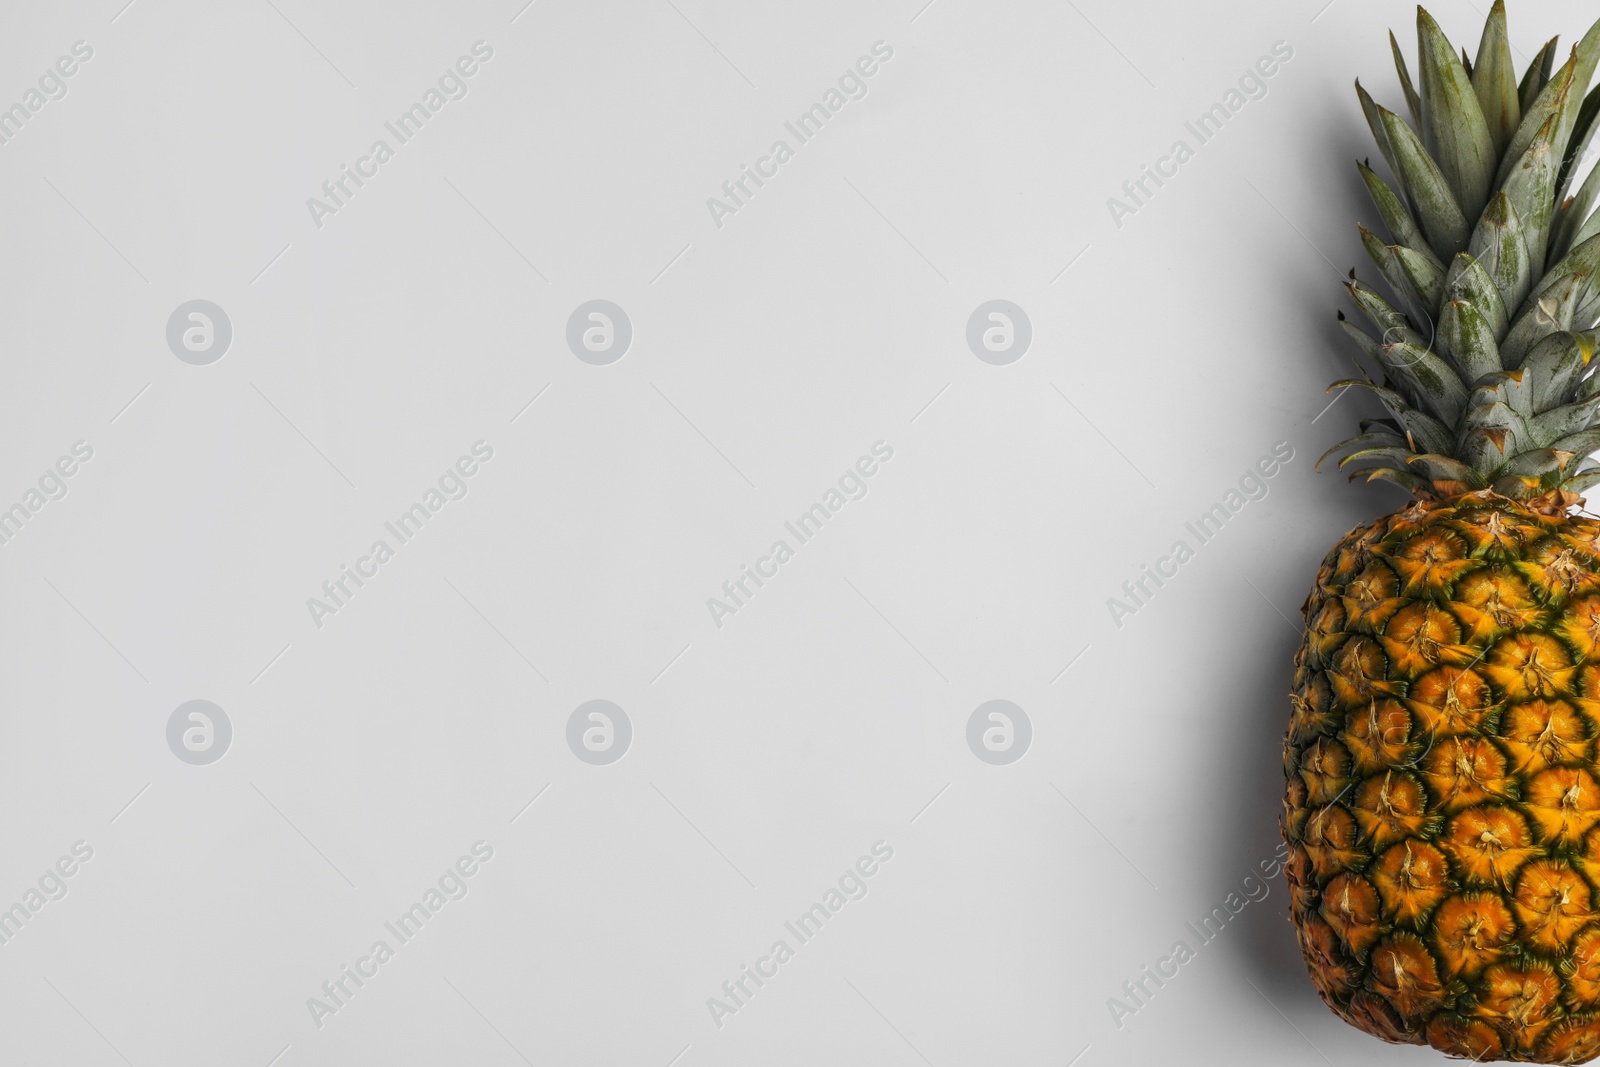 Photo of Tasty whole pineapple with leaves on white background, top view